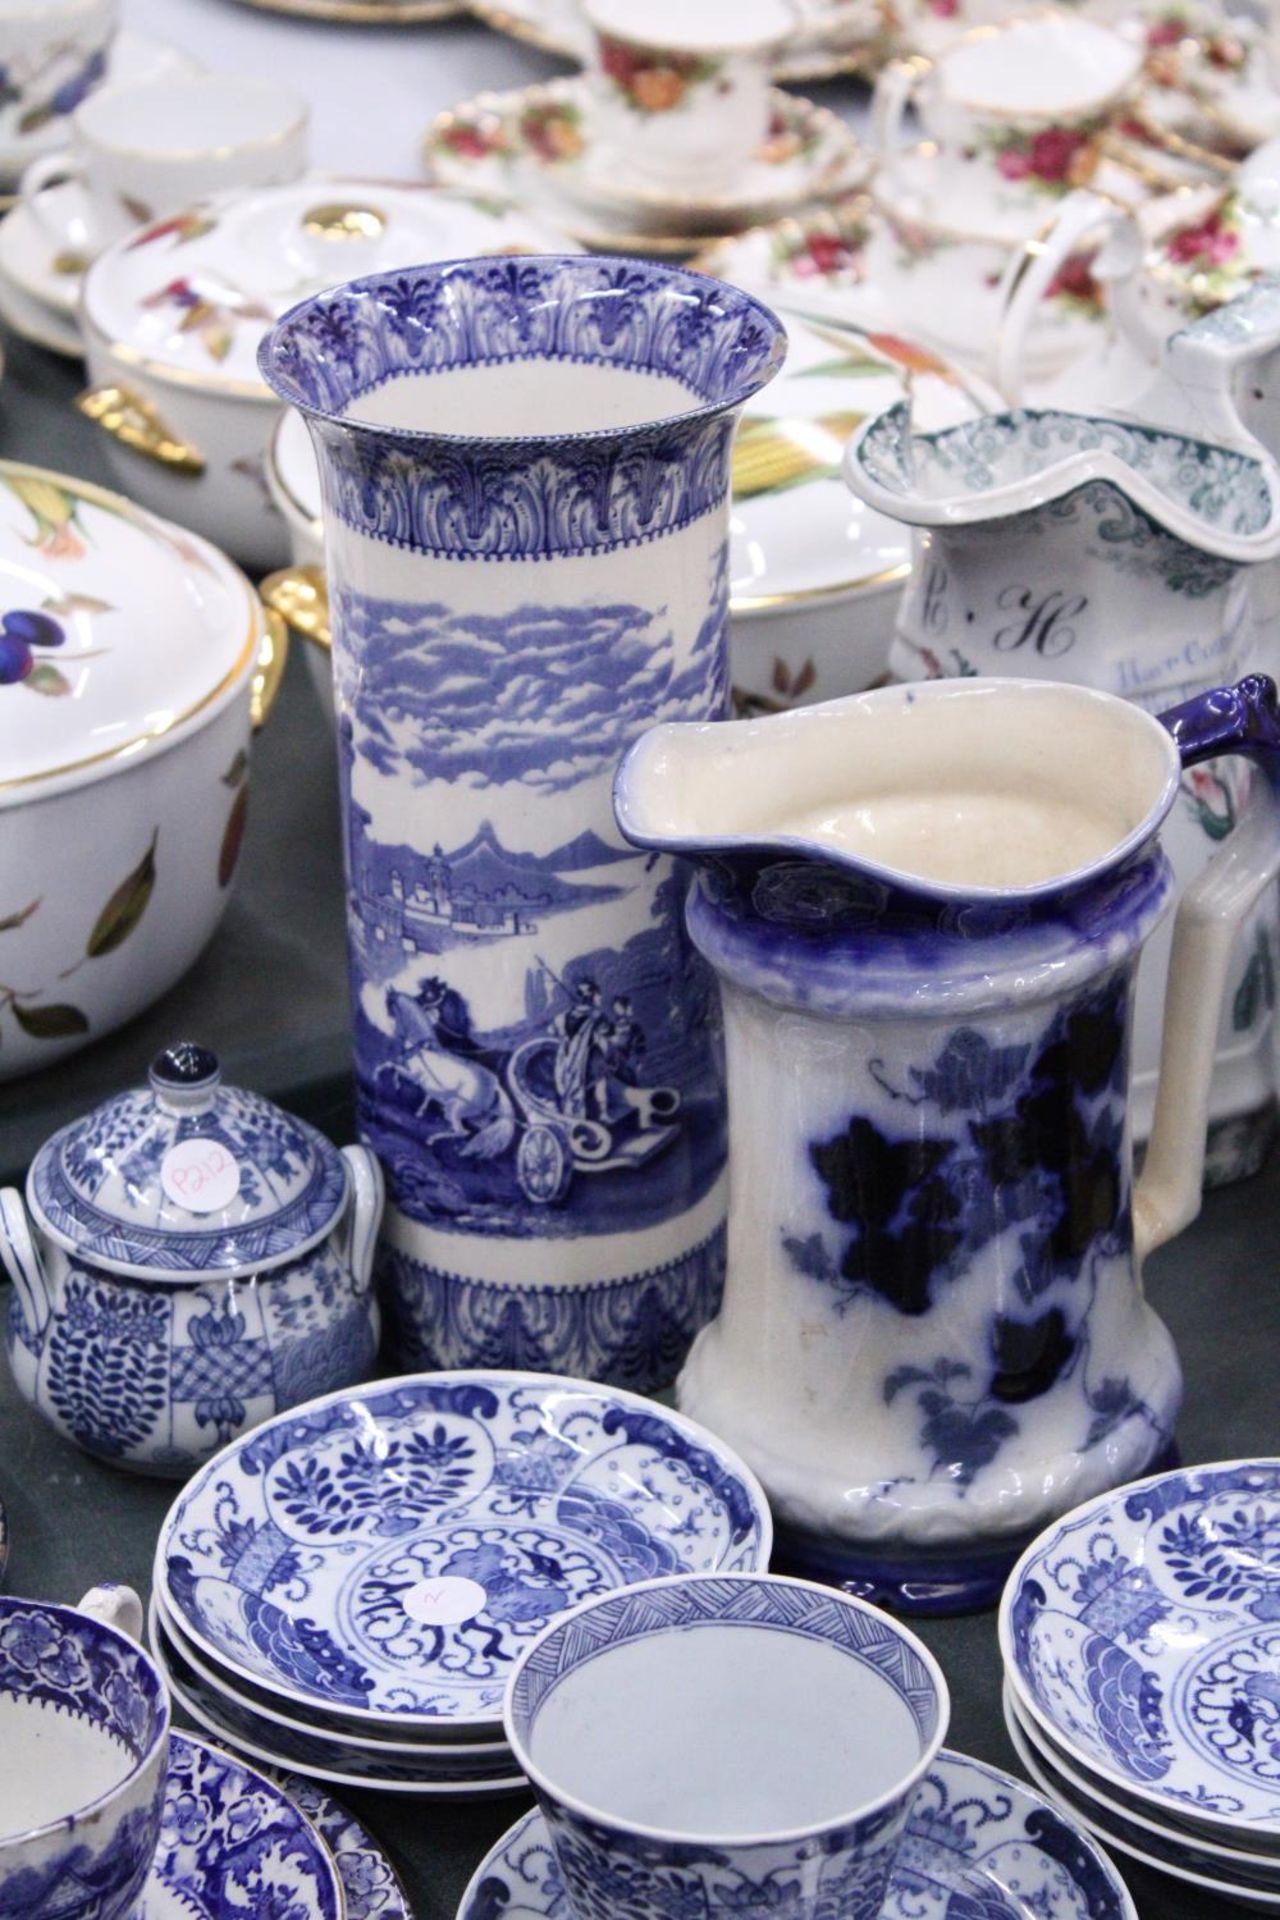 A LARGE QUANTITY OF ORIENTAL STYLE BLUE AND WHITE TO INCLUDE CUPS,SAUCERS,SIDE PLATES PLUS A JUG AND - Image 2 of 6